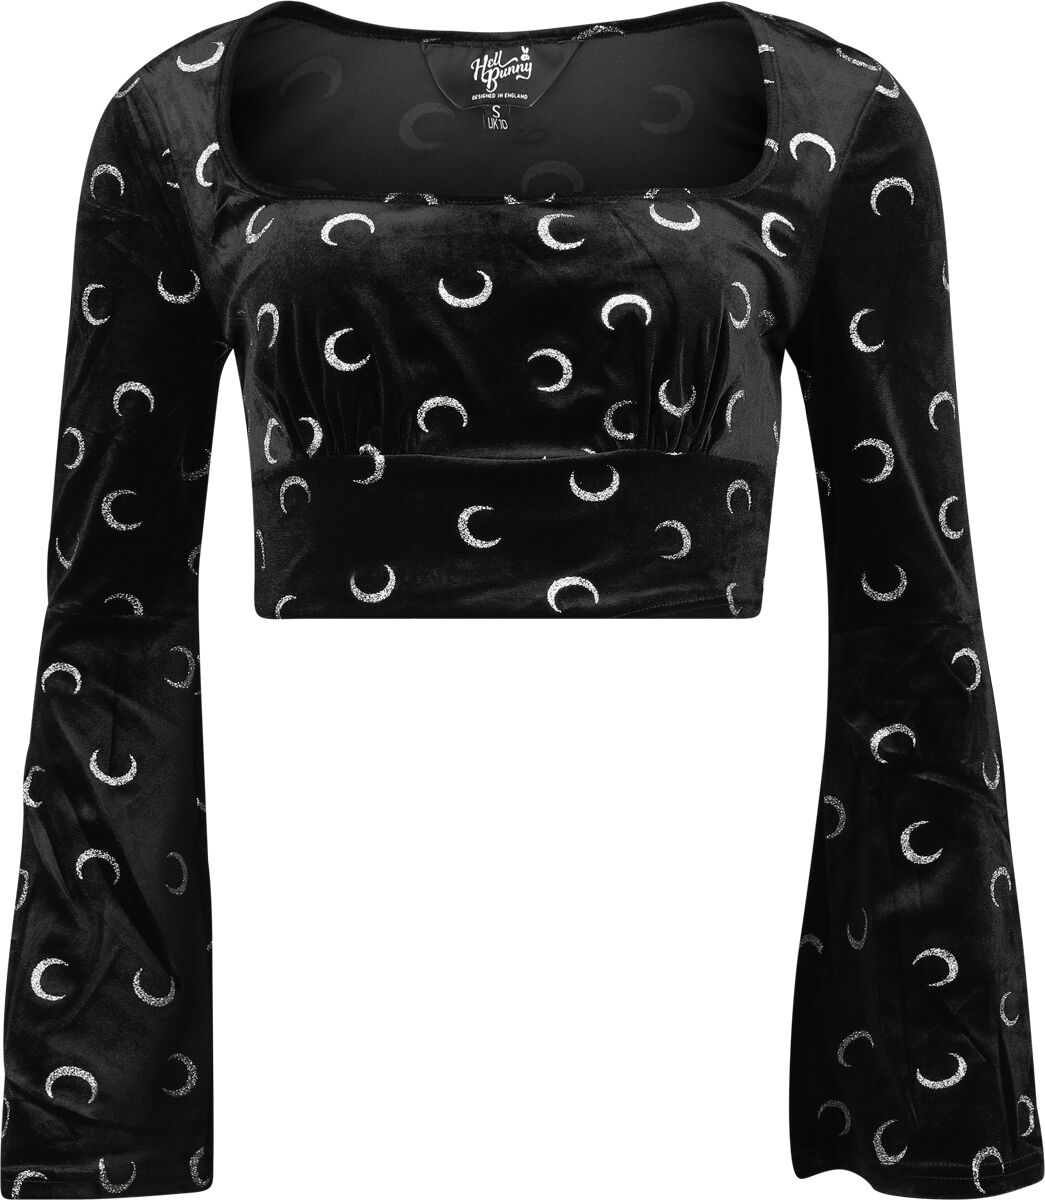 Image of Maglia Maniche Lunghe Rockabilly di Hell Bunny - Misty moon top - XS a XL - Donna - nero/bianco